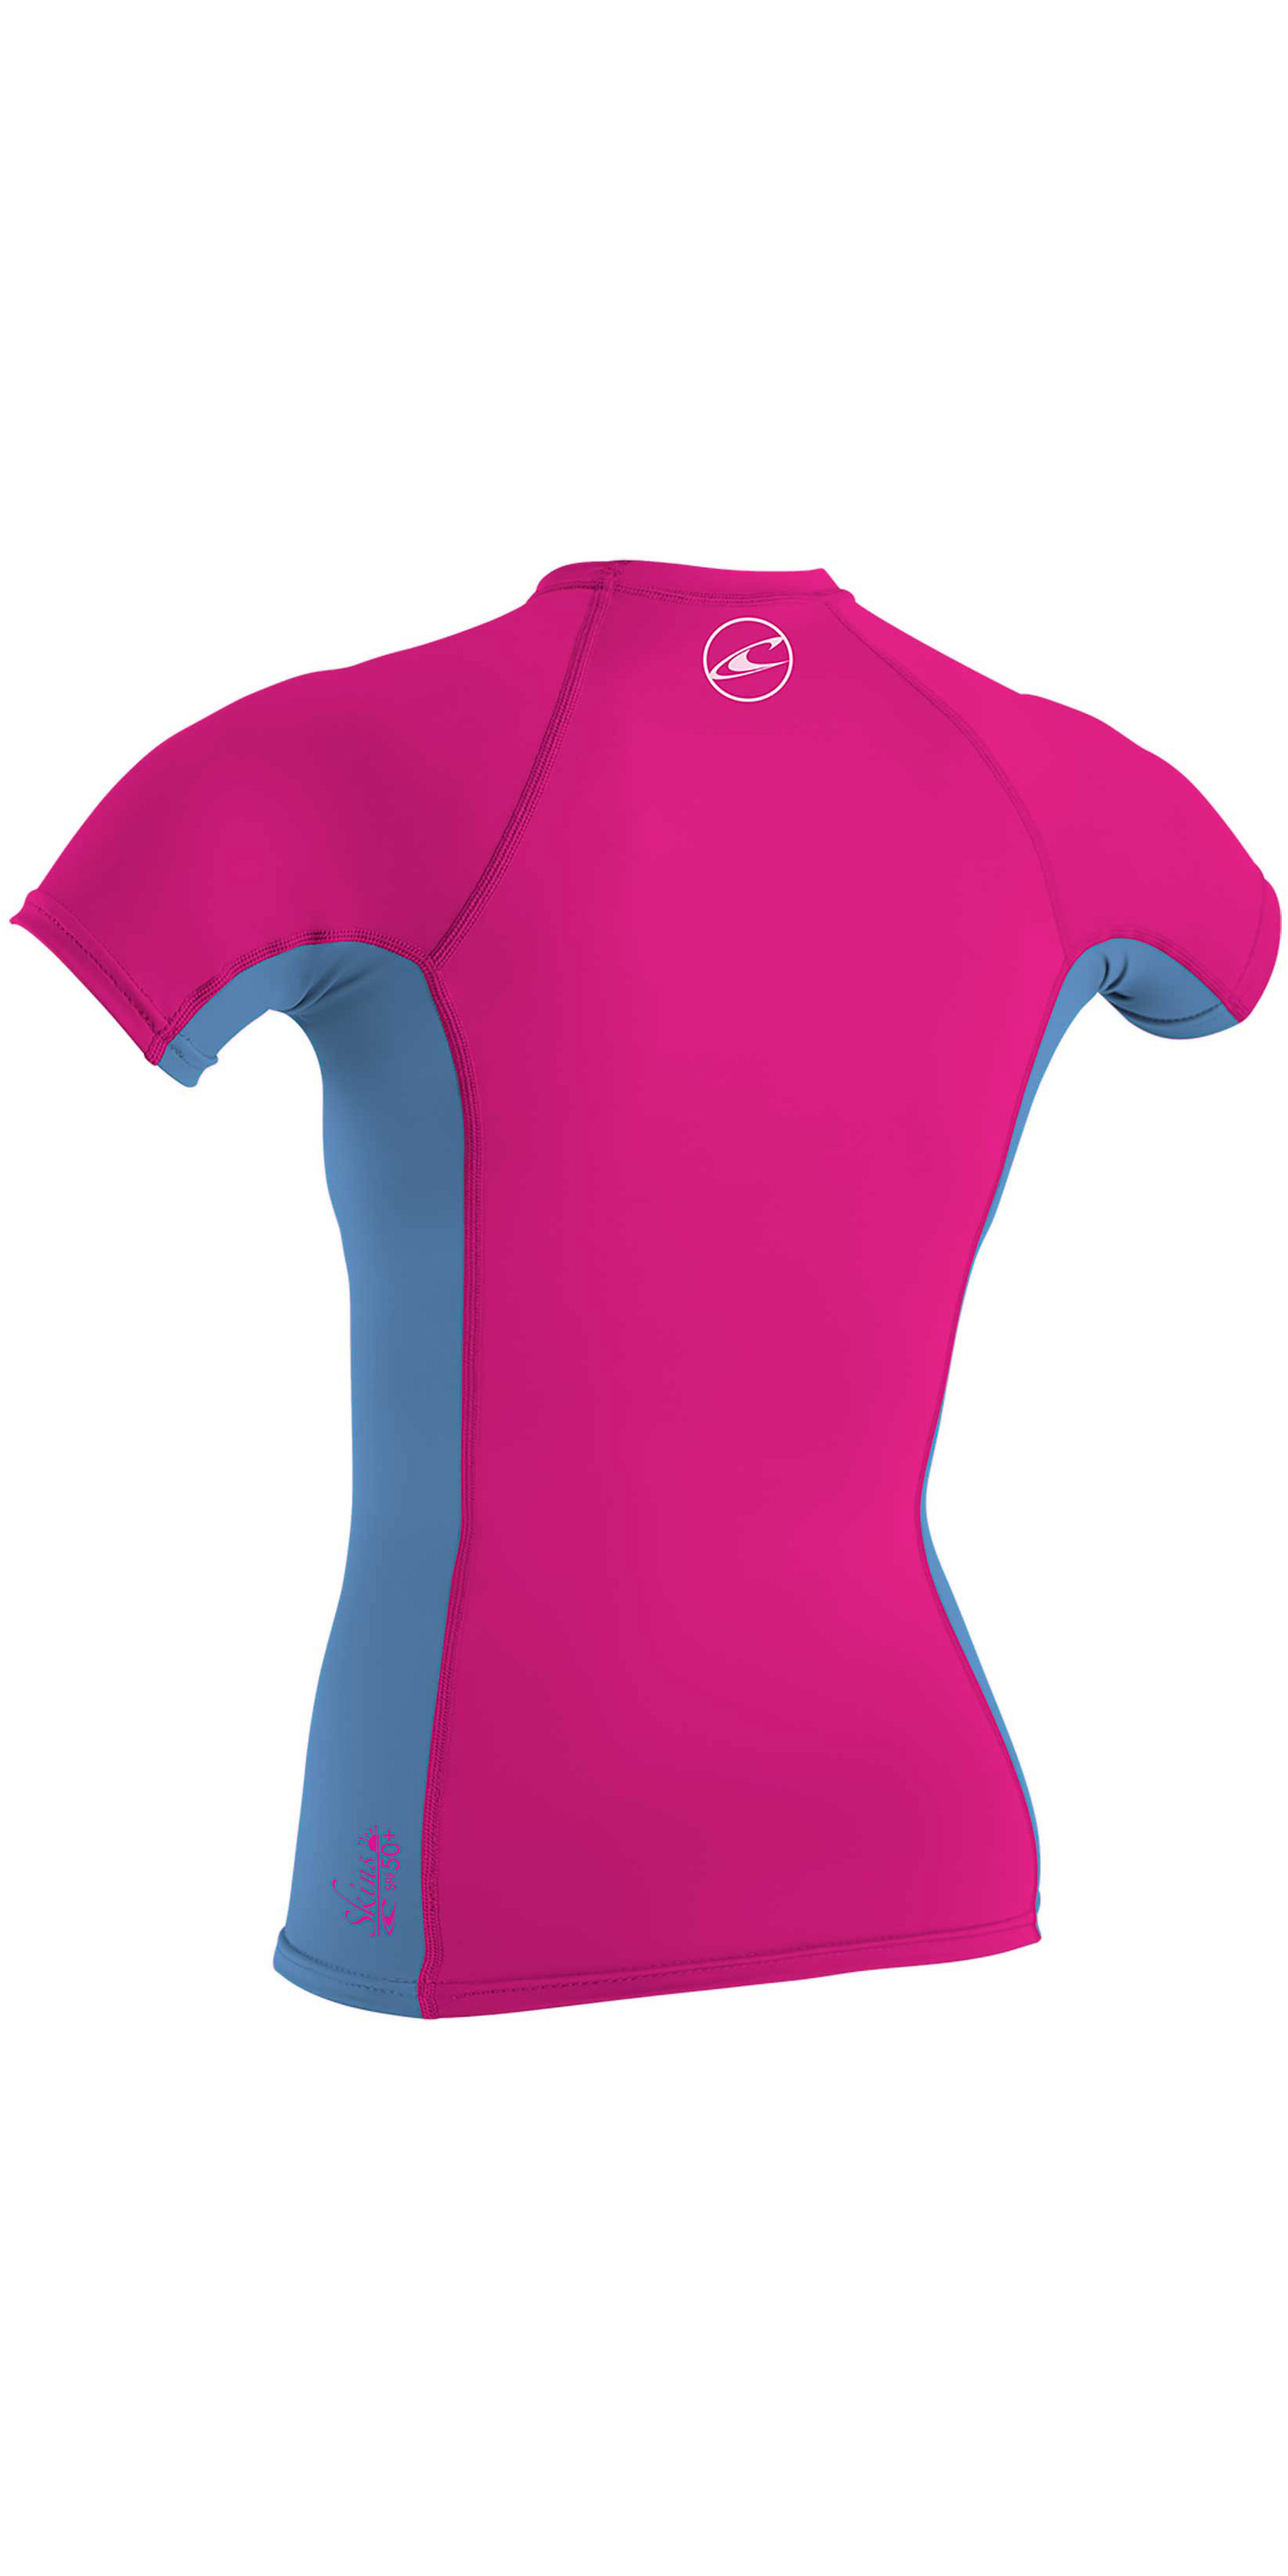 ONeill Girls Premium Skins Short Sleeve Rash Vest Top Berry Periwinkle Quick Dry UV Sun Protection and SPF Properties 